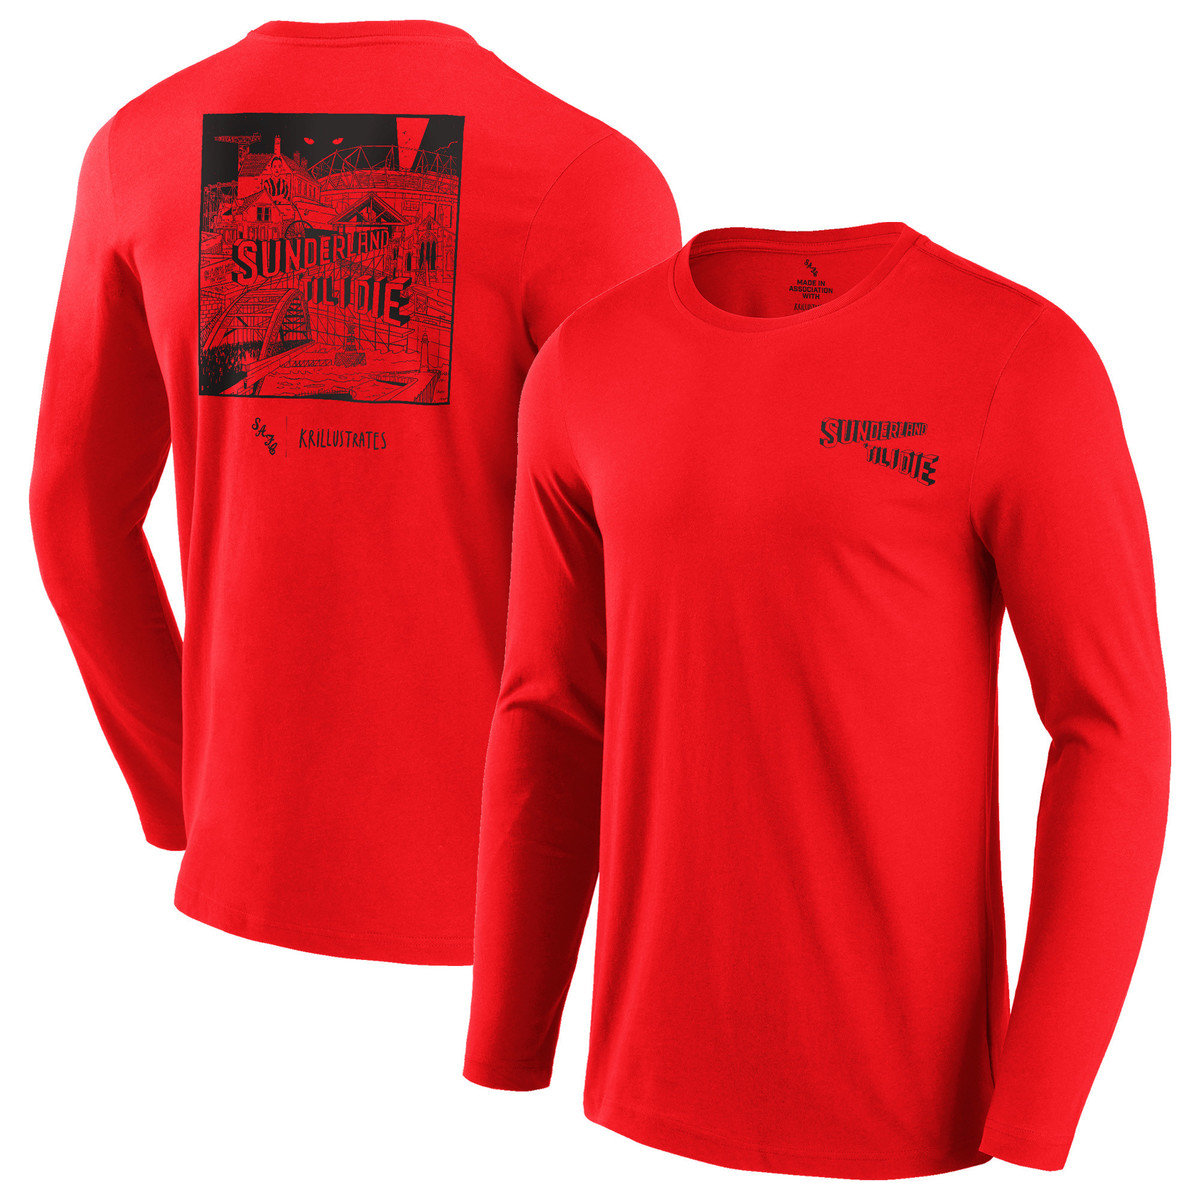 Buy the STID RED L/S TEE online at Sunderland AFC Store